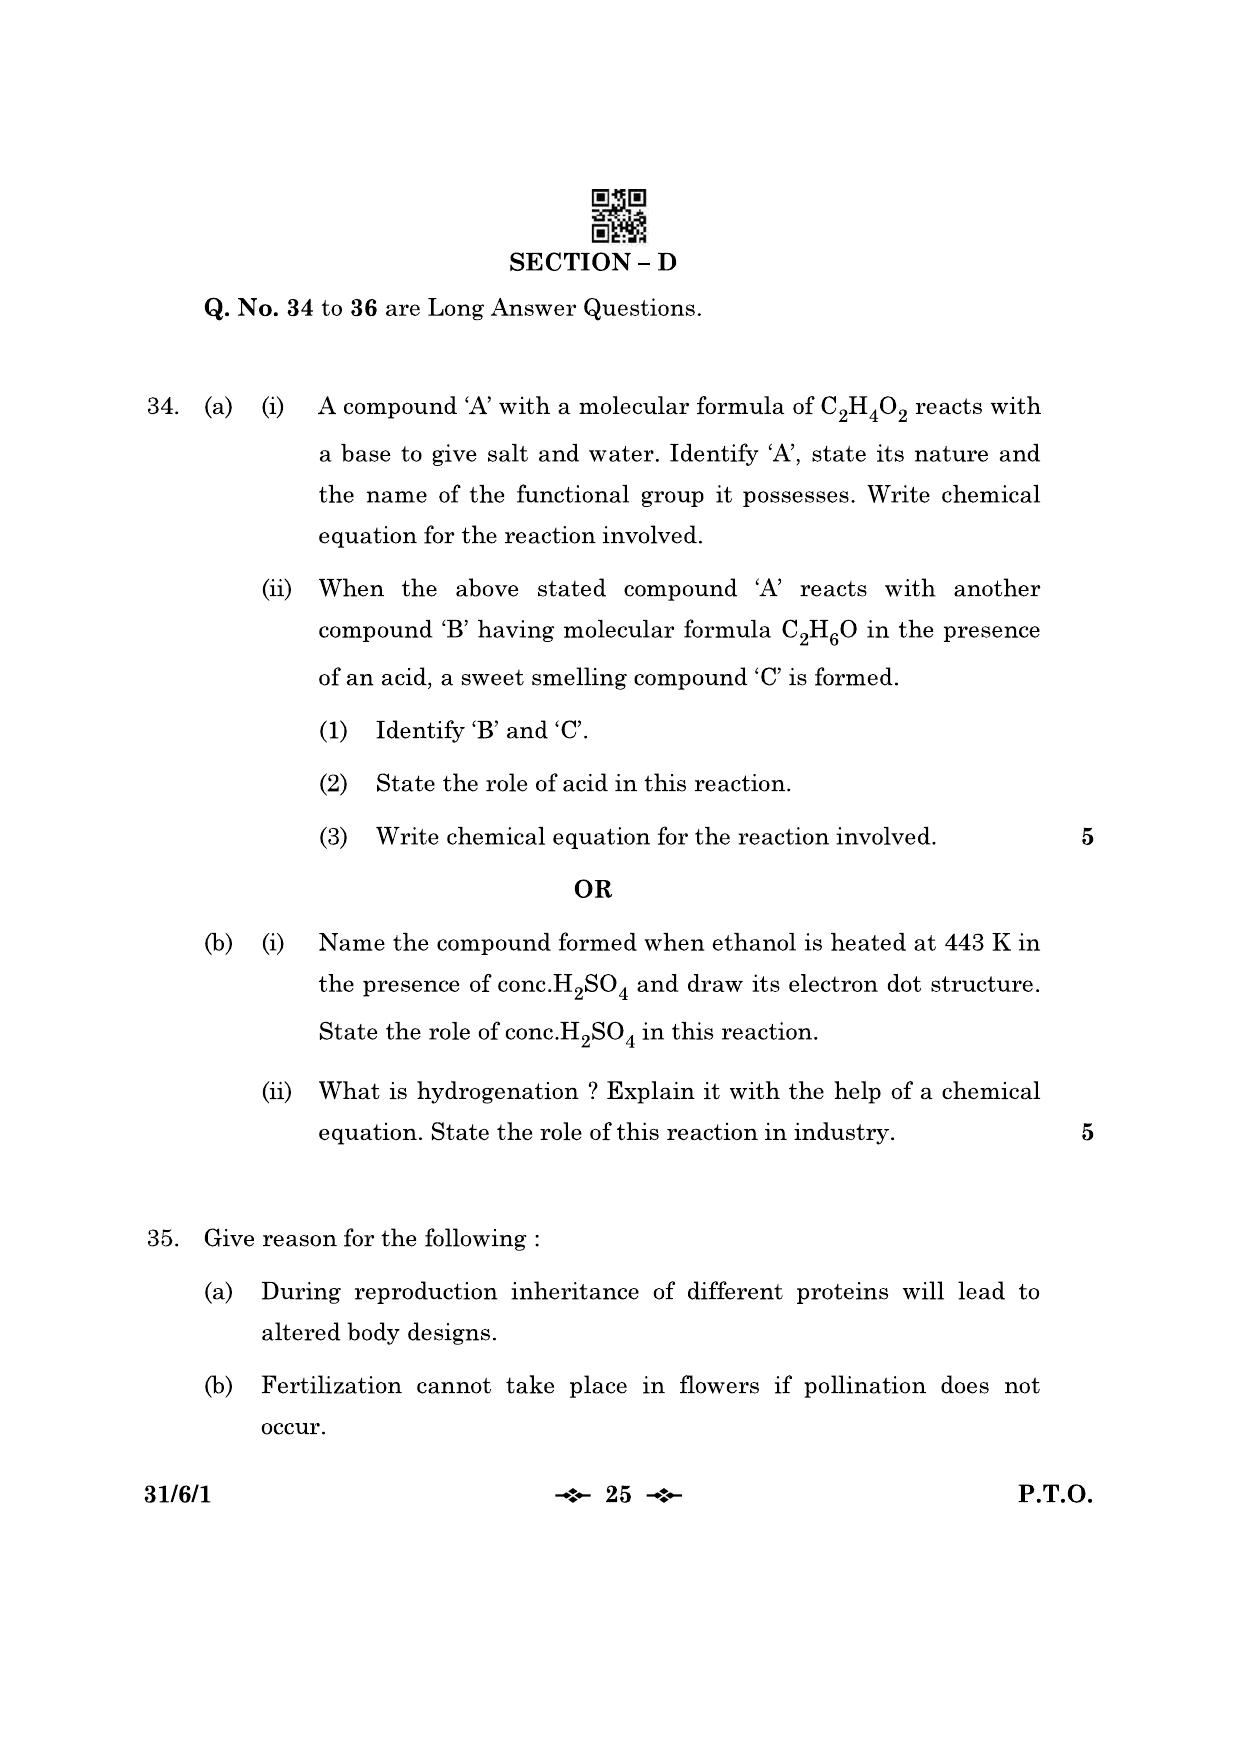 CBSE Class 10 31-6-1 Science 2023 Question Paper - Page 25